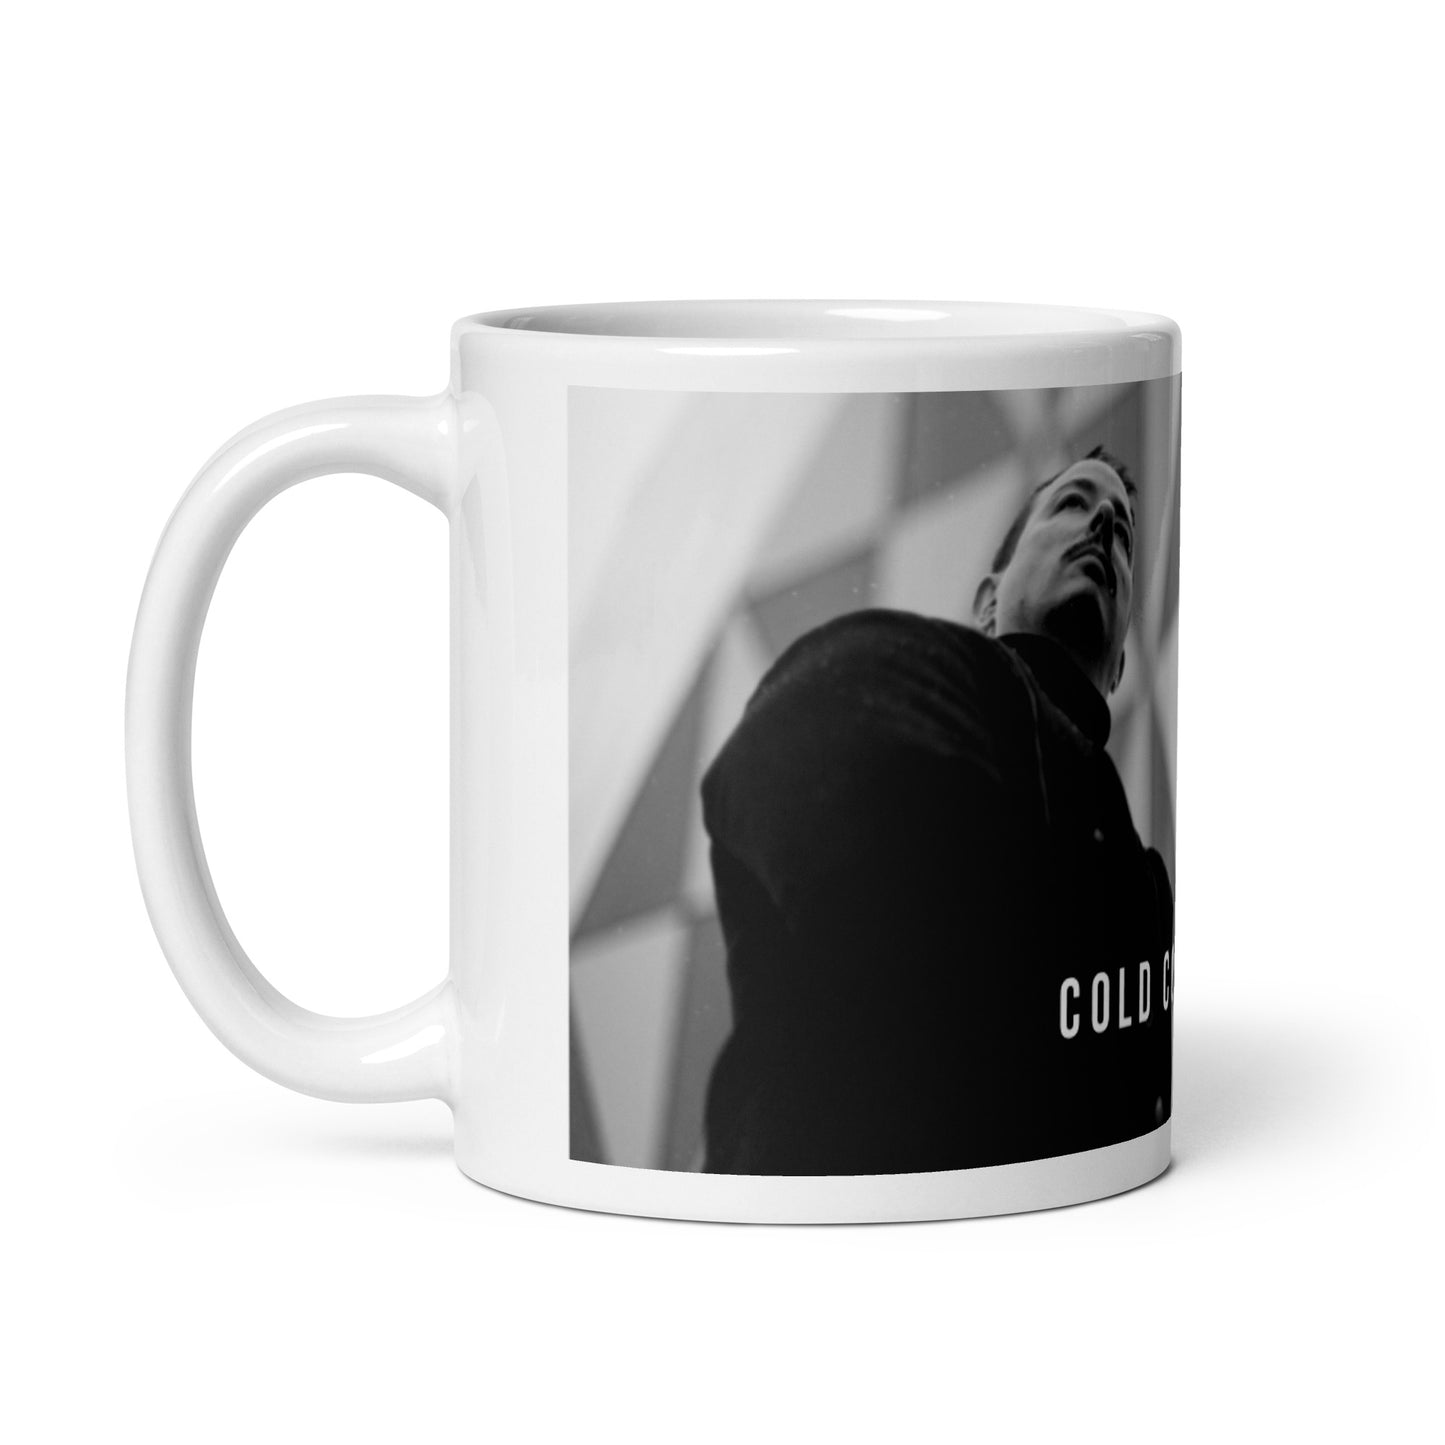 Cold Connection, official band photo, White glossy mug